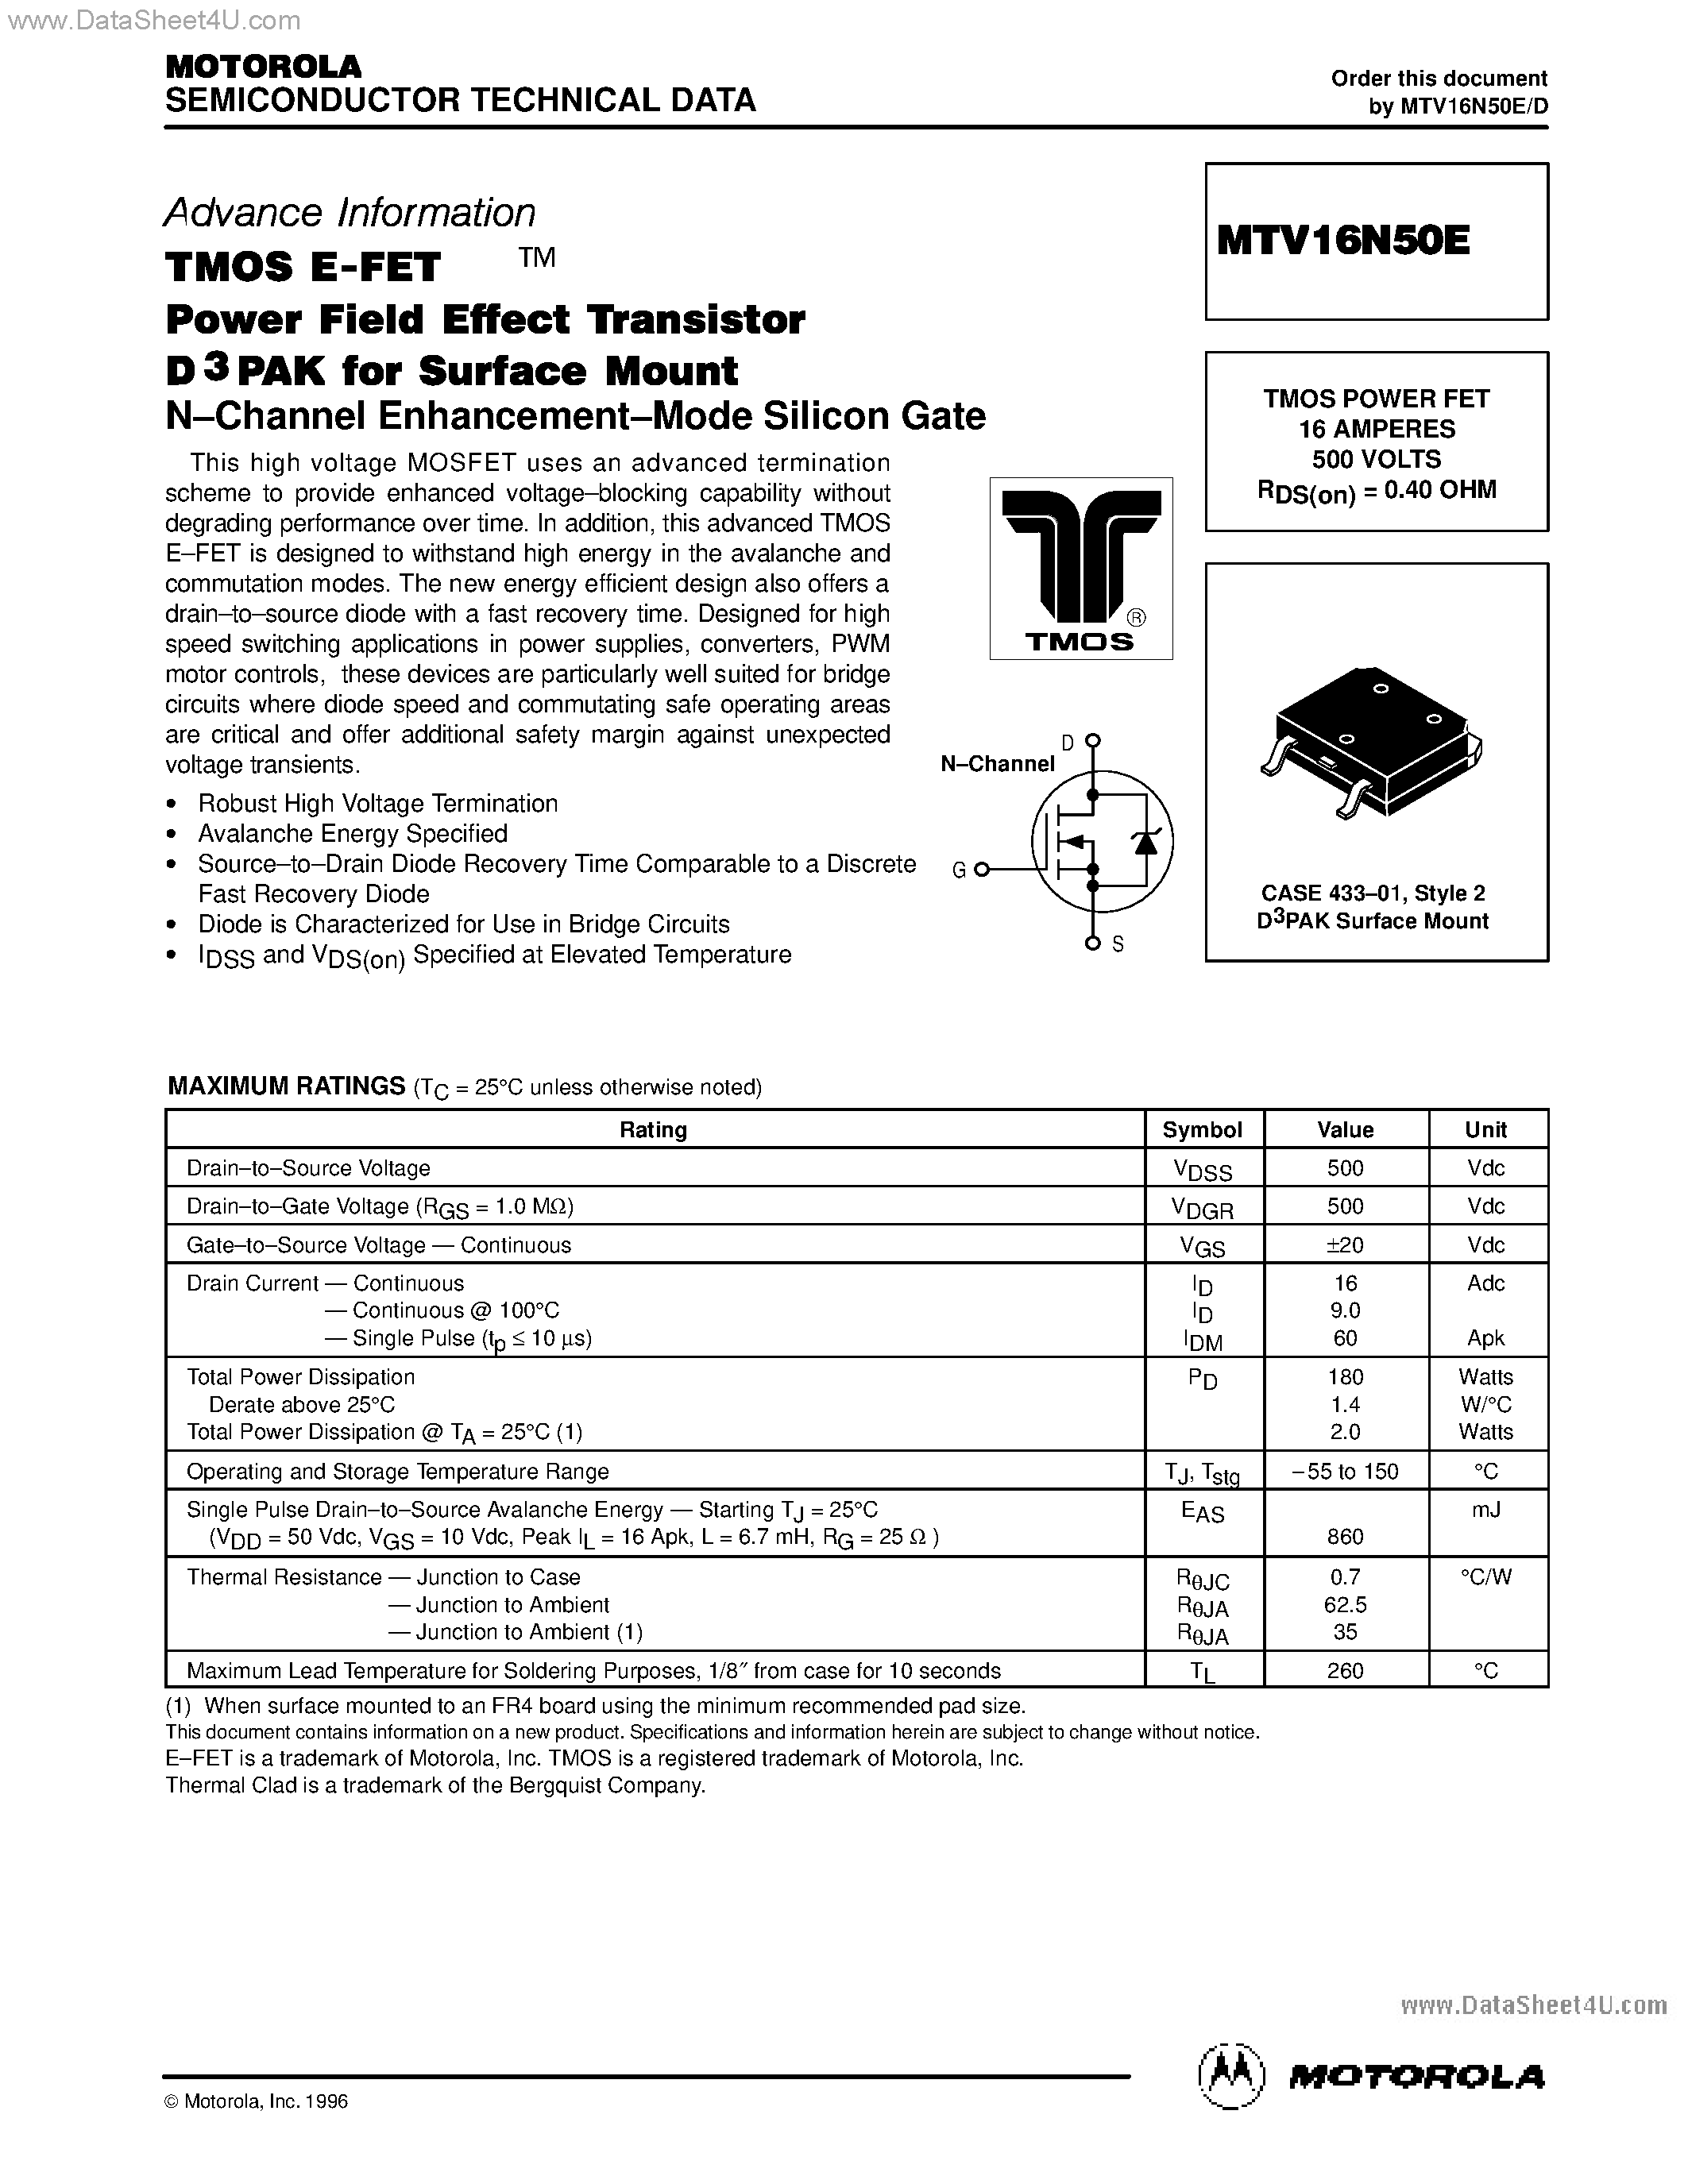 Datasheet MTV16N50E - TMOS POWER FET 16 AMPERES 500 VOLTS page 1